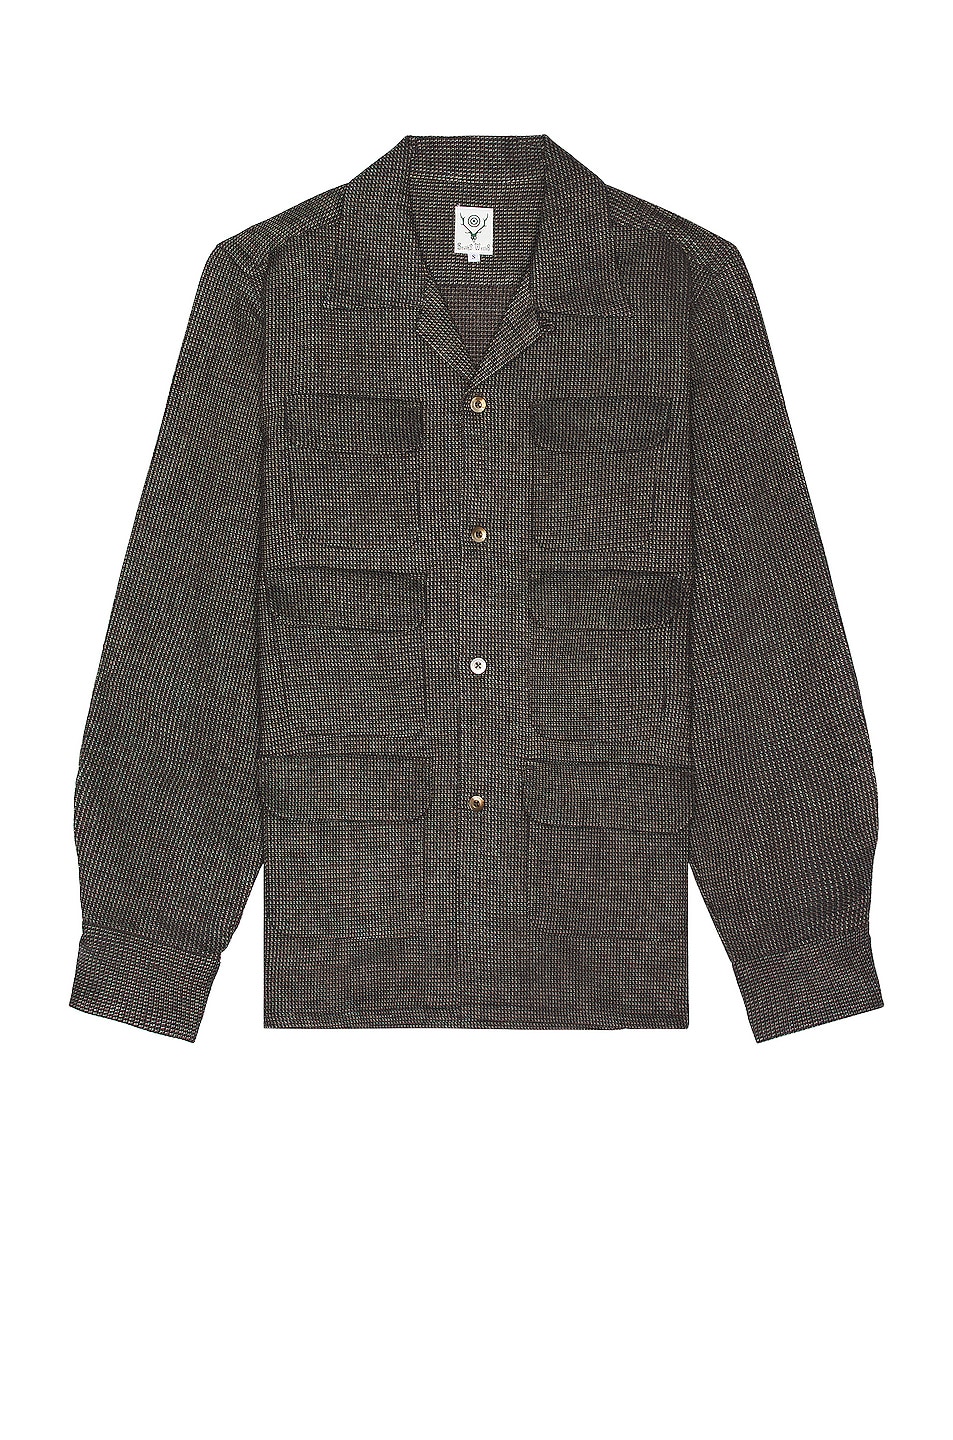 Image 1 of South2 West8 6 Pocket Classic Shirt in Brown